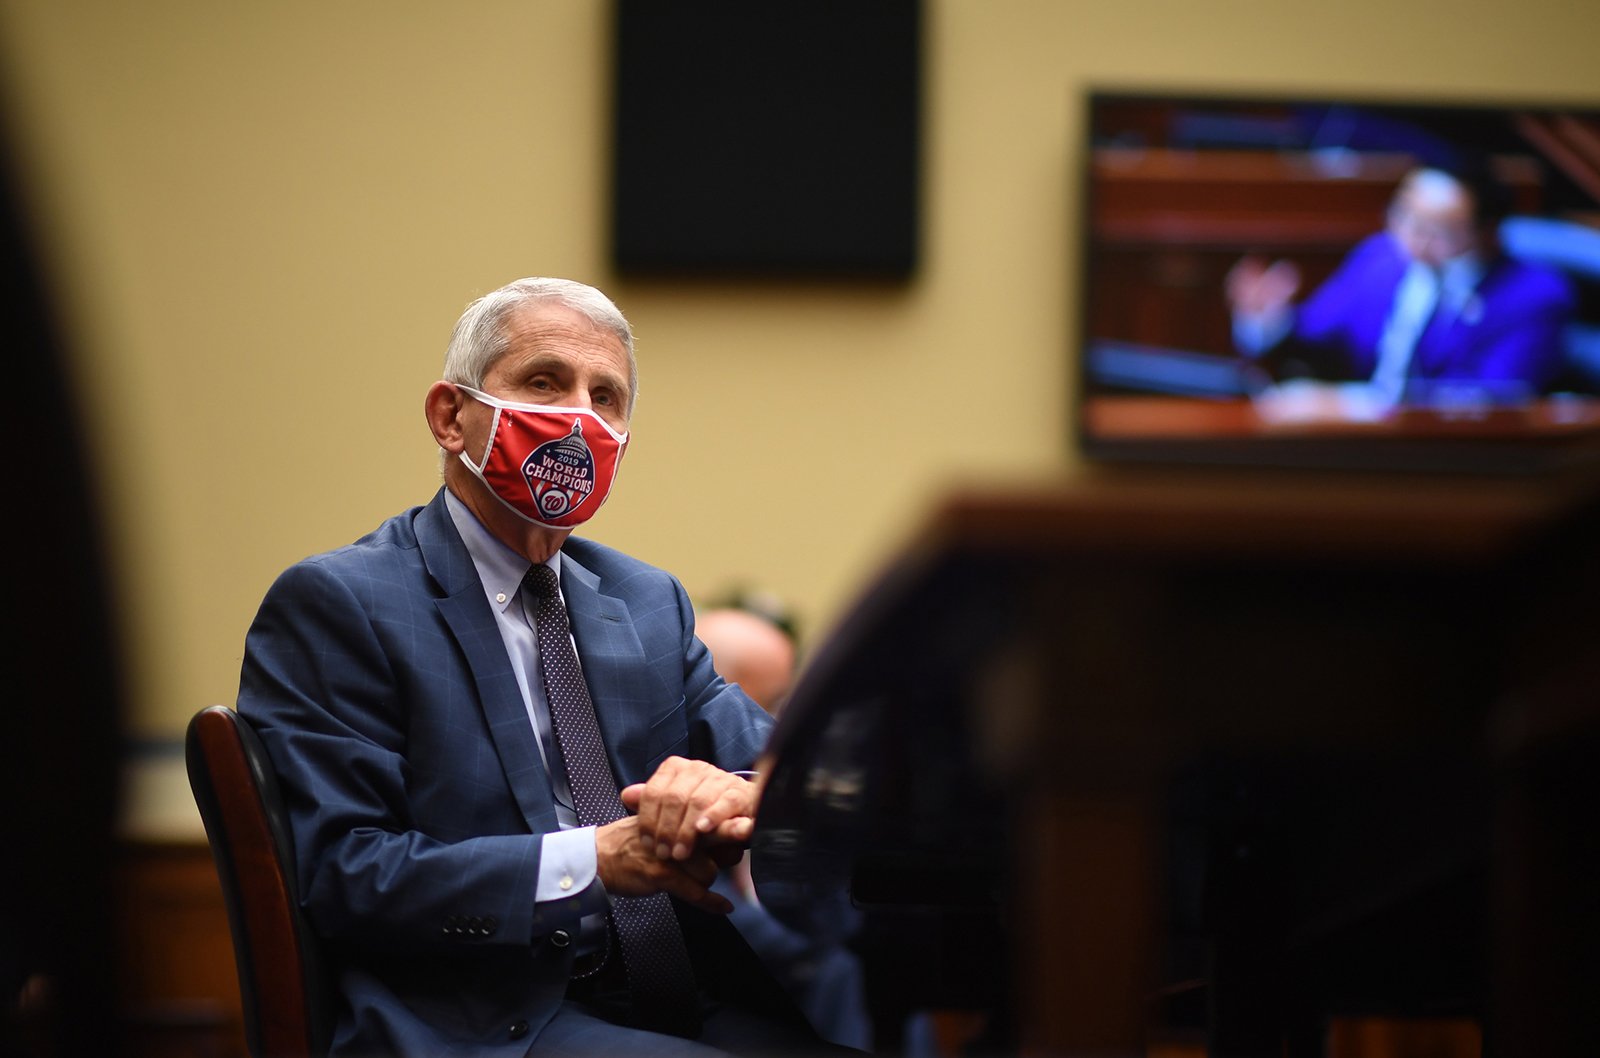 Dr. Anthony Fauci, director of the National Institute for Allergy and Infectious Diseases, testifies before a House Subcommittee on the Coronavirus Crisis hearing on July 31 in Washington.